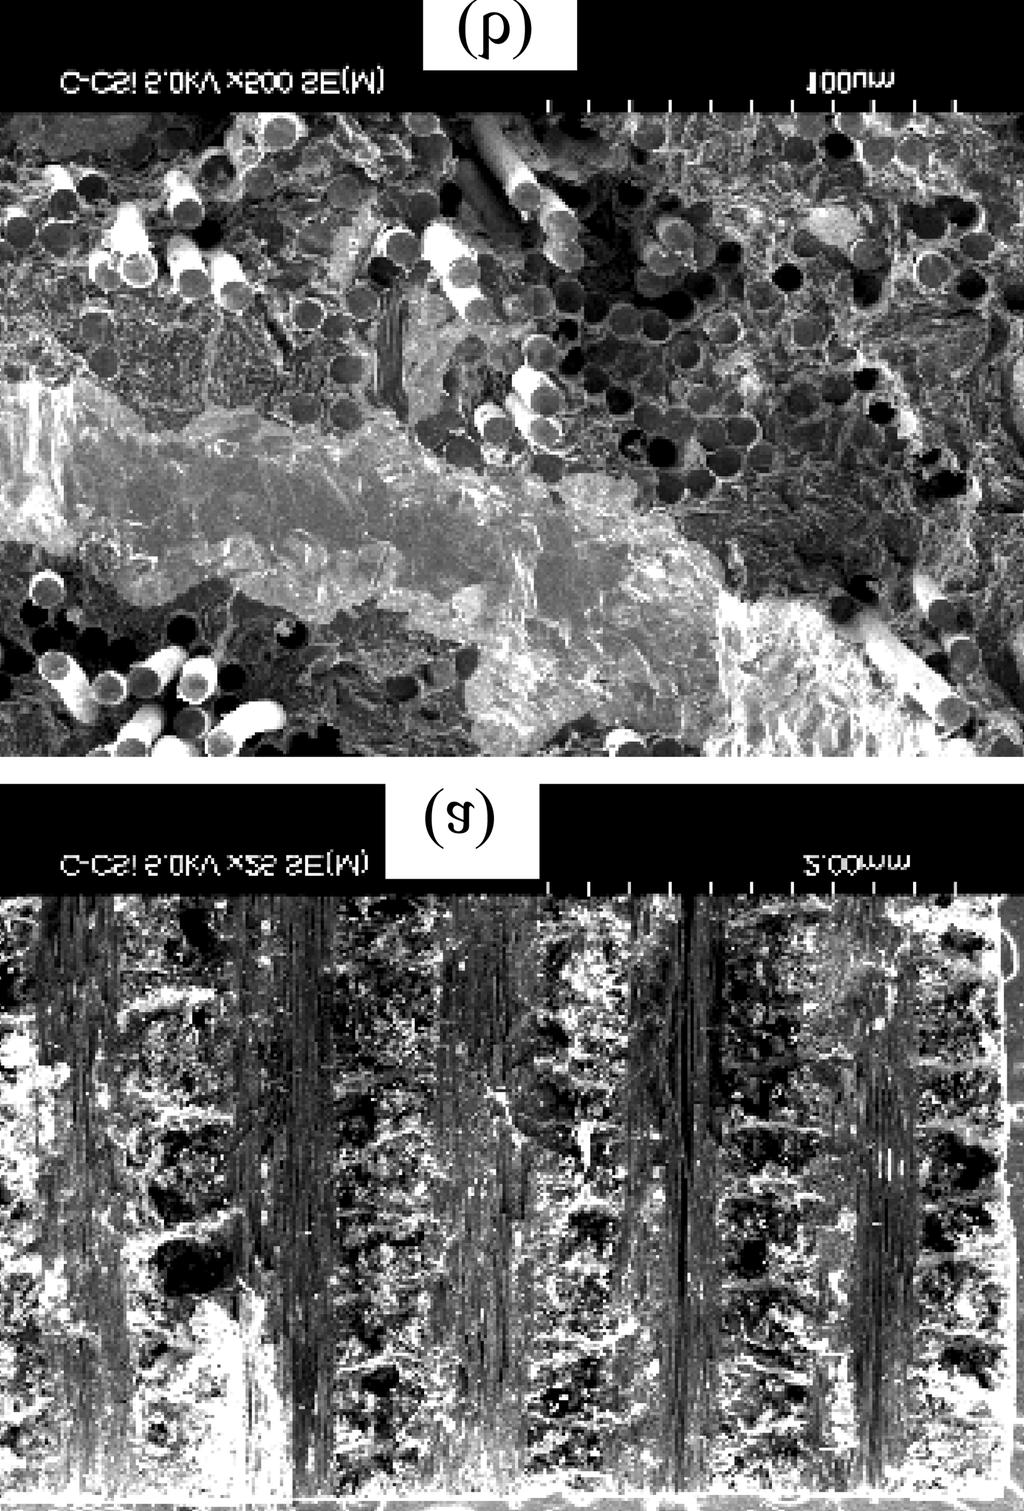 Effect of Silicon Infiltration on the Mechanical Properties of 2D Cross-ply Carbon-Carbon Composites decreased, tensile strength decreased from 235 MPa of the C/C composite to 41 MPa of the C/C-Si